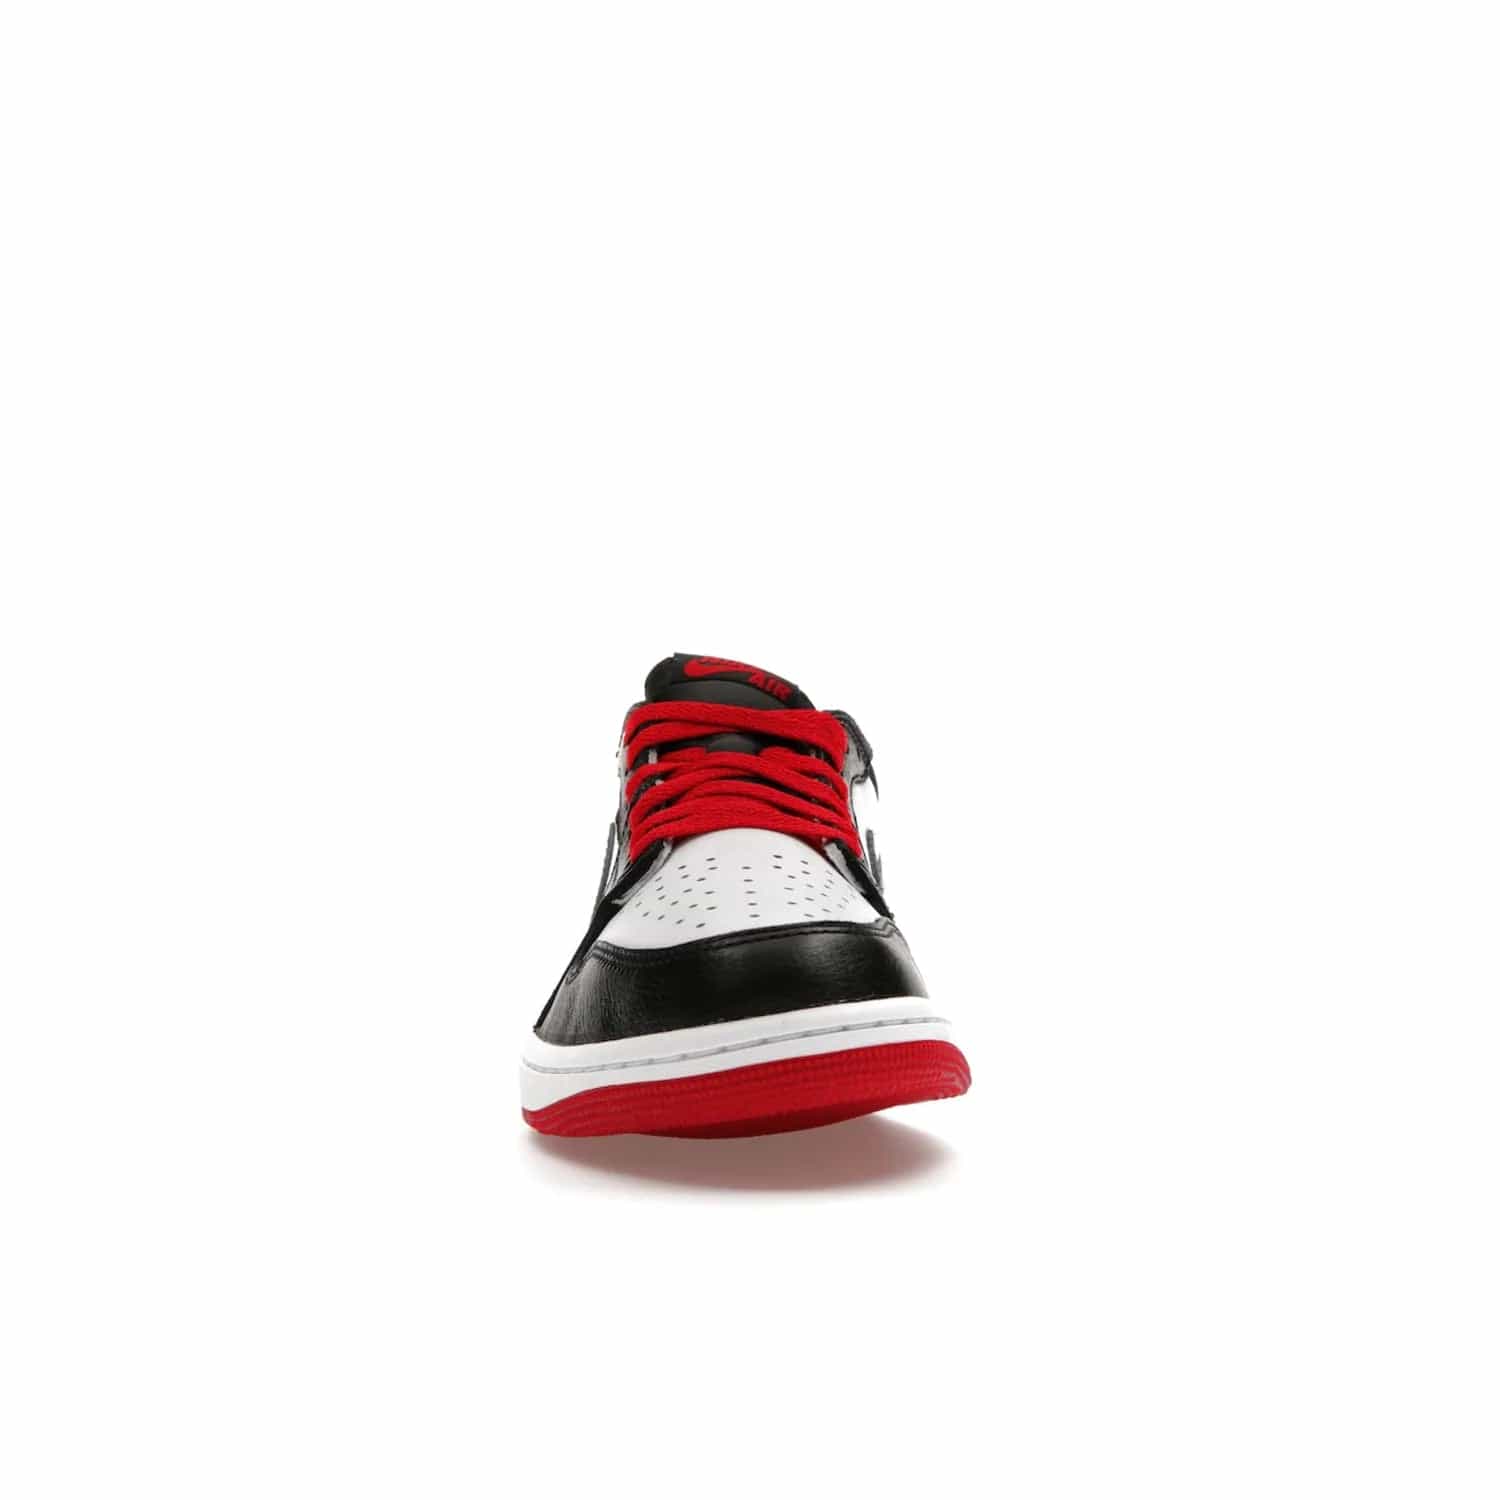 Jordan 1 Retro Low OG Black Toe (2023) - Image 10 - Only at www.BallersClubKickz.com - Upgrade your wardrobe with the Jordan 1 Retro Low OG Black Toe featuring a classic black and white upper and dynamic red heel counter. Eye-catching white midsole and iconic black Swoosh and Wings complete the timeless yet modern look. Shop now to own this iconic shoe!